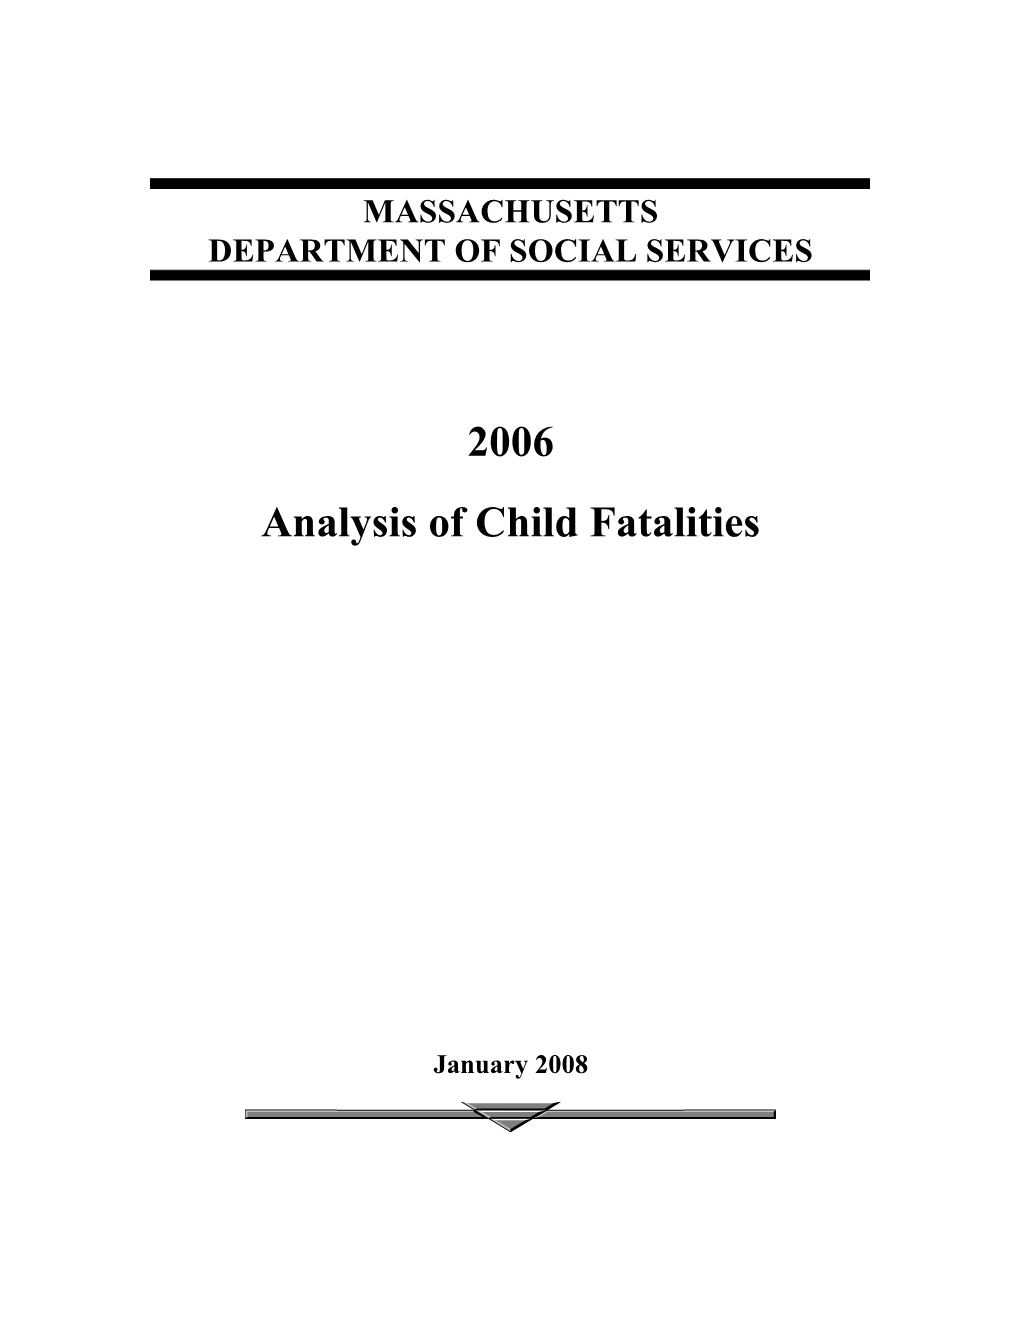 Child Fatalities in the Dss Caseload